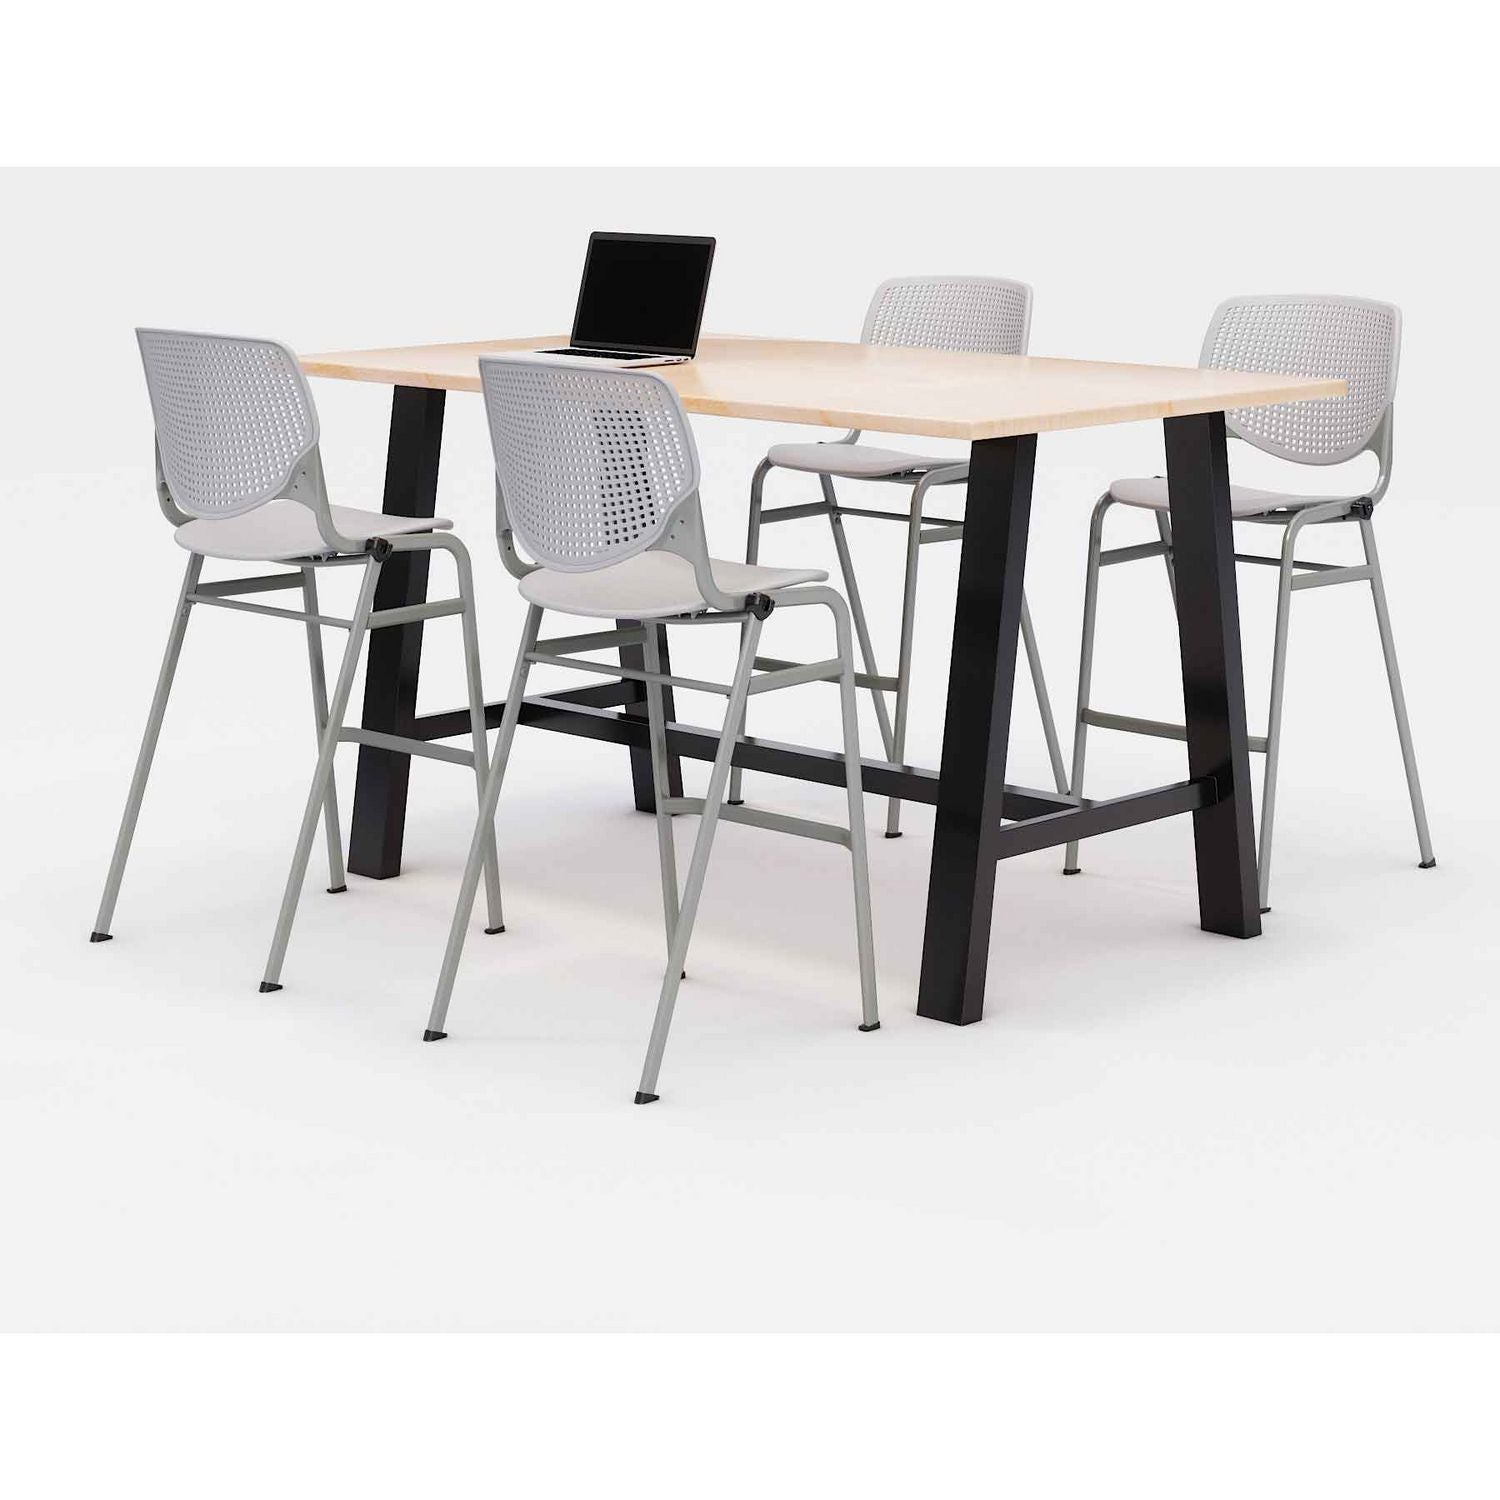 midtown-bistro-dining-table-with-four-light-gray-kool-barstools-36-x-72-x-41-kensington-maple-ships-in-4-6-business-days_kfi840031900784 - 1